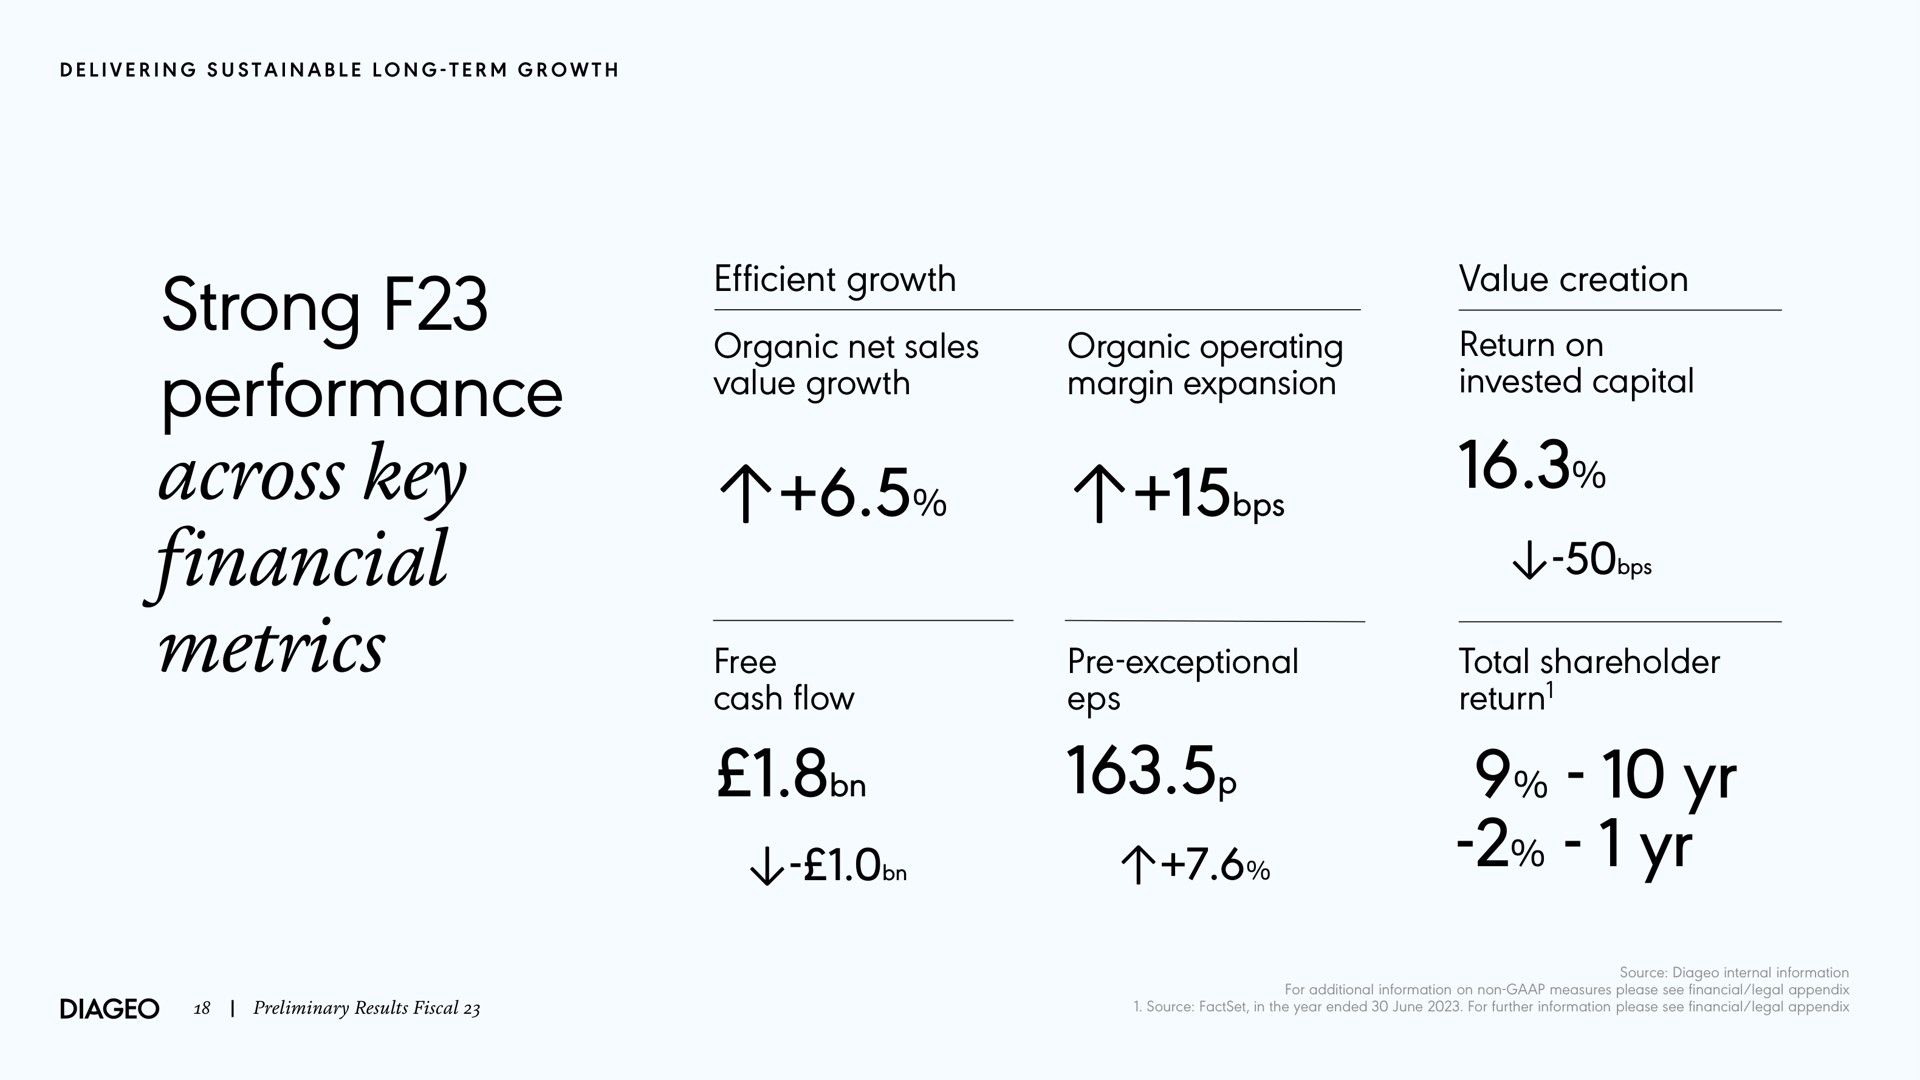 strong performance across key financial metrics efficient growth organic net sales value growth organic operating margin expansion value creation return on invested capital free cash flow exceptional total shareholder return | Diageo